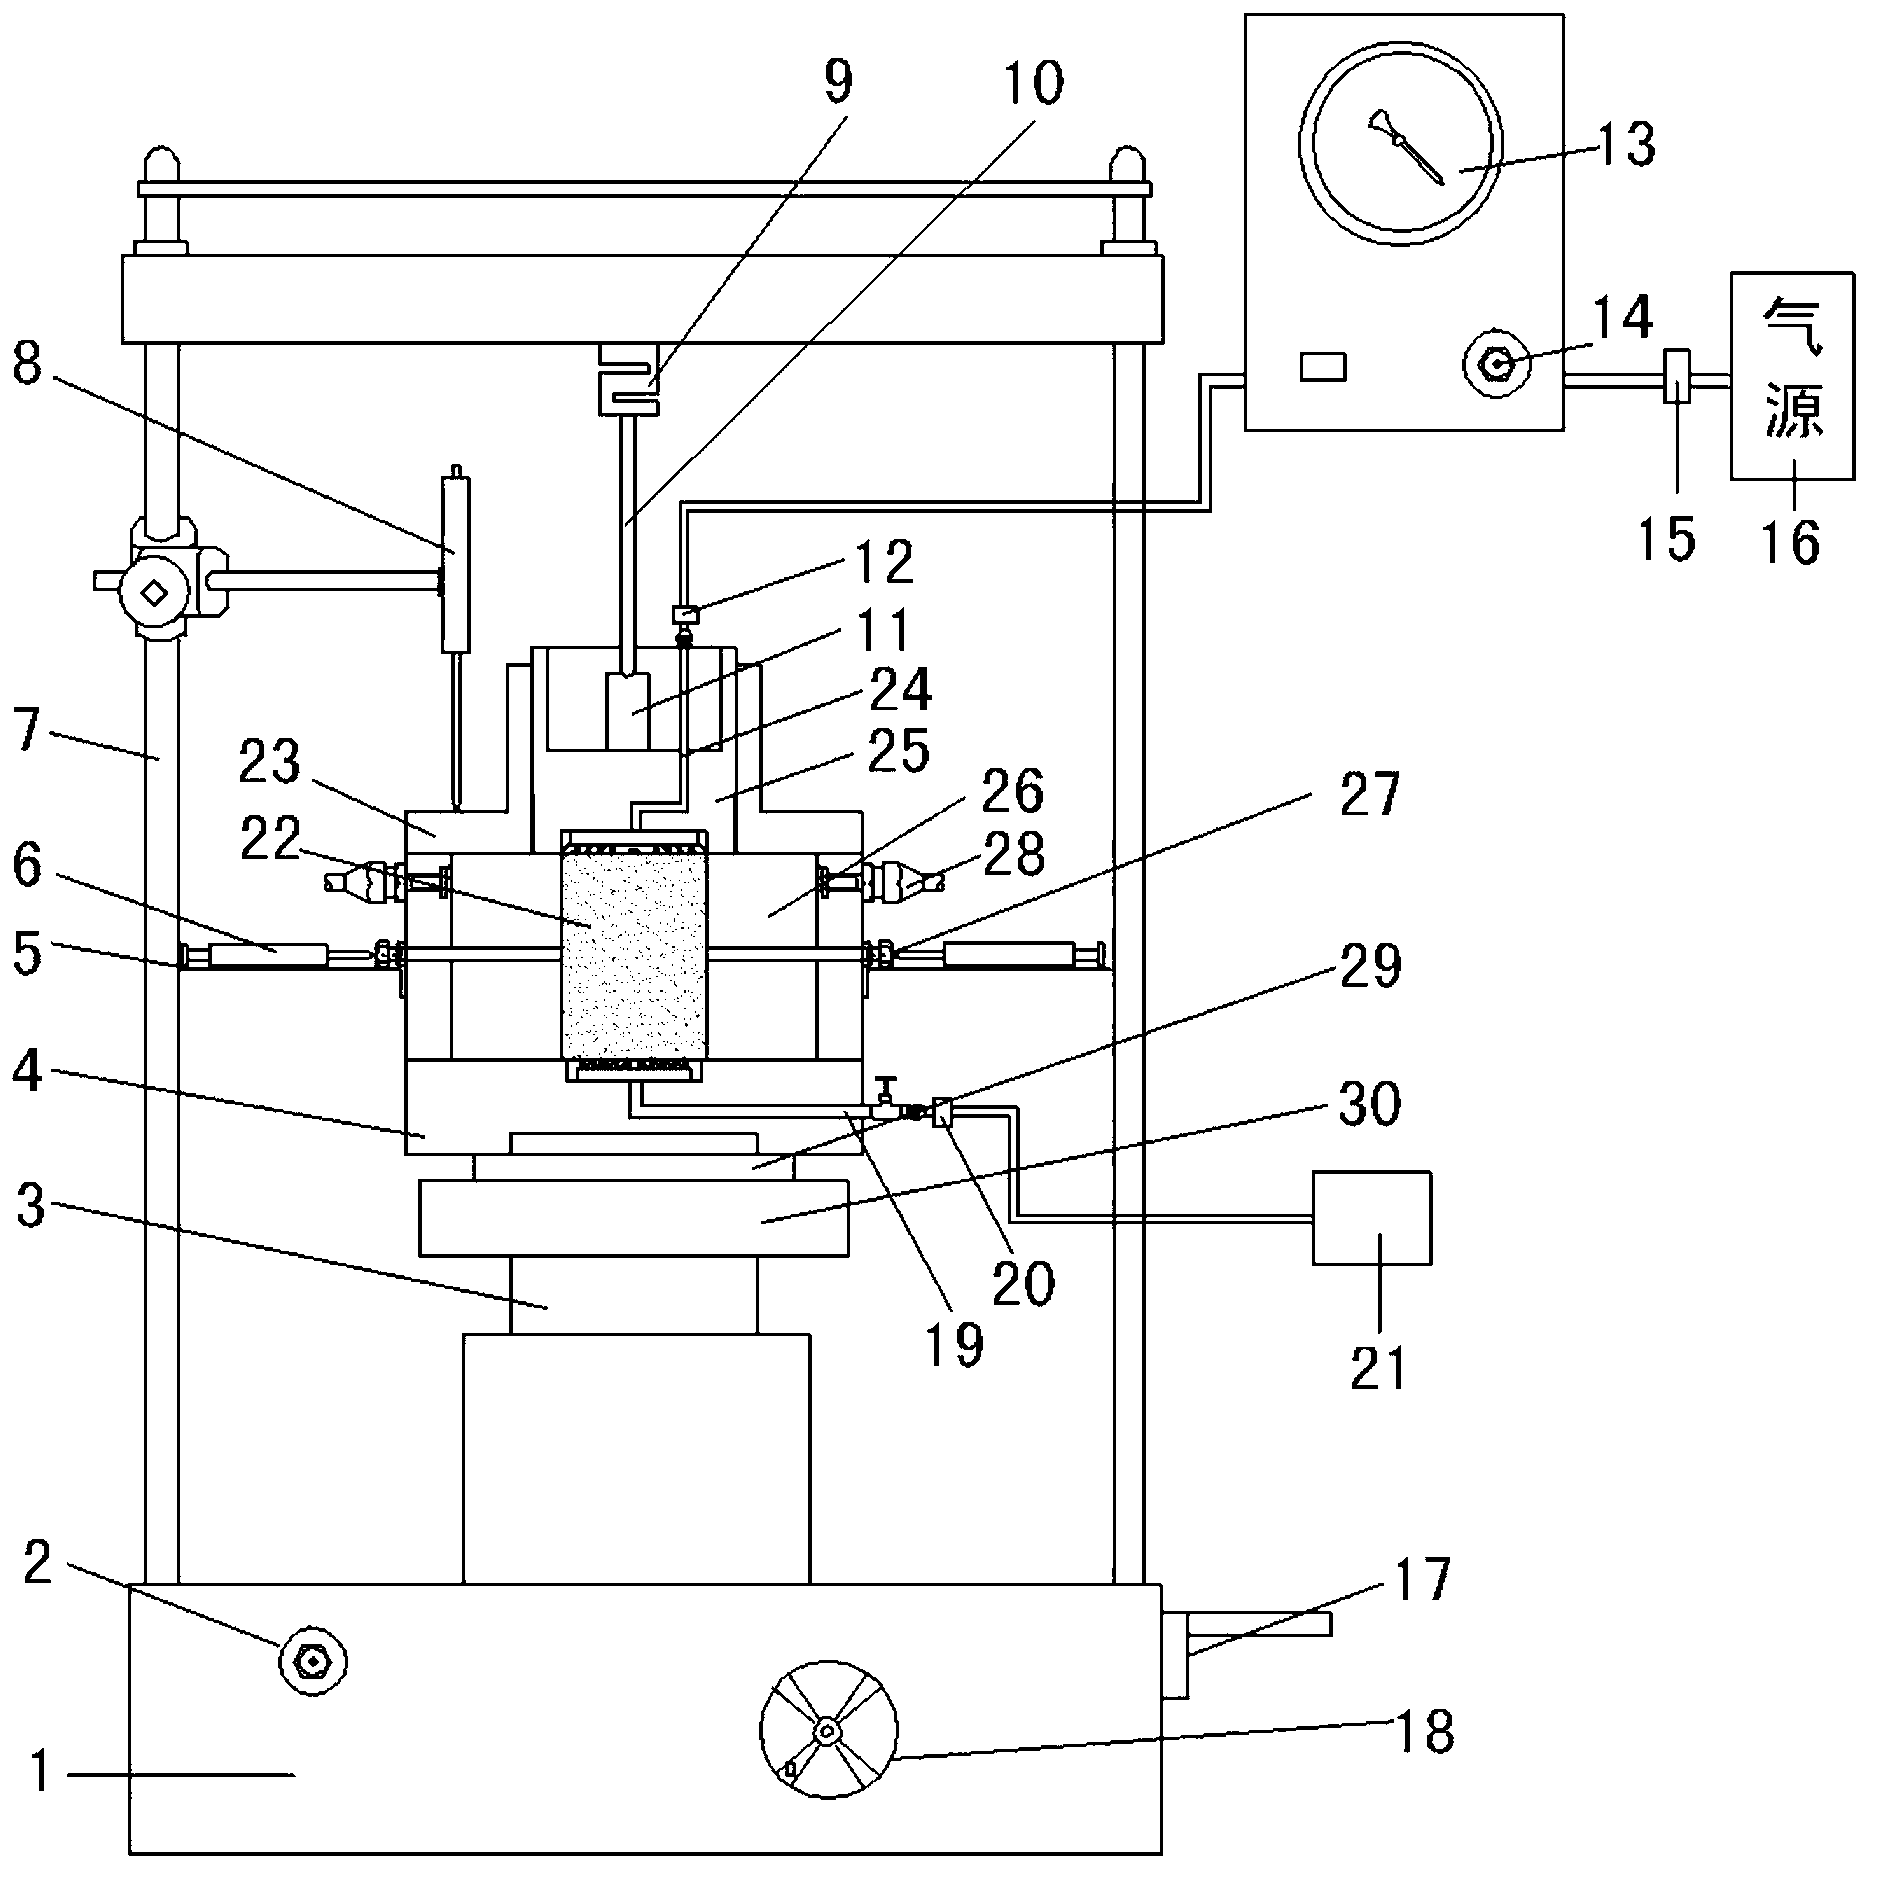 True triaxial apparatus of unsaturated soil